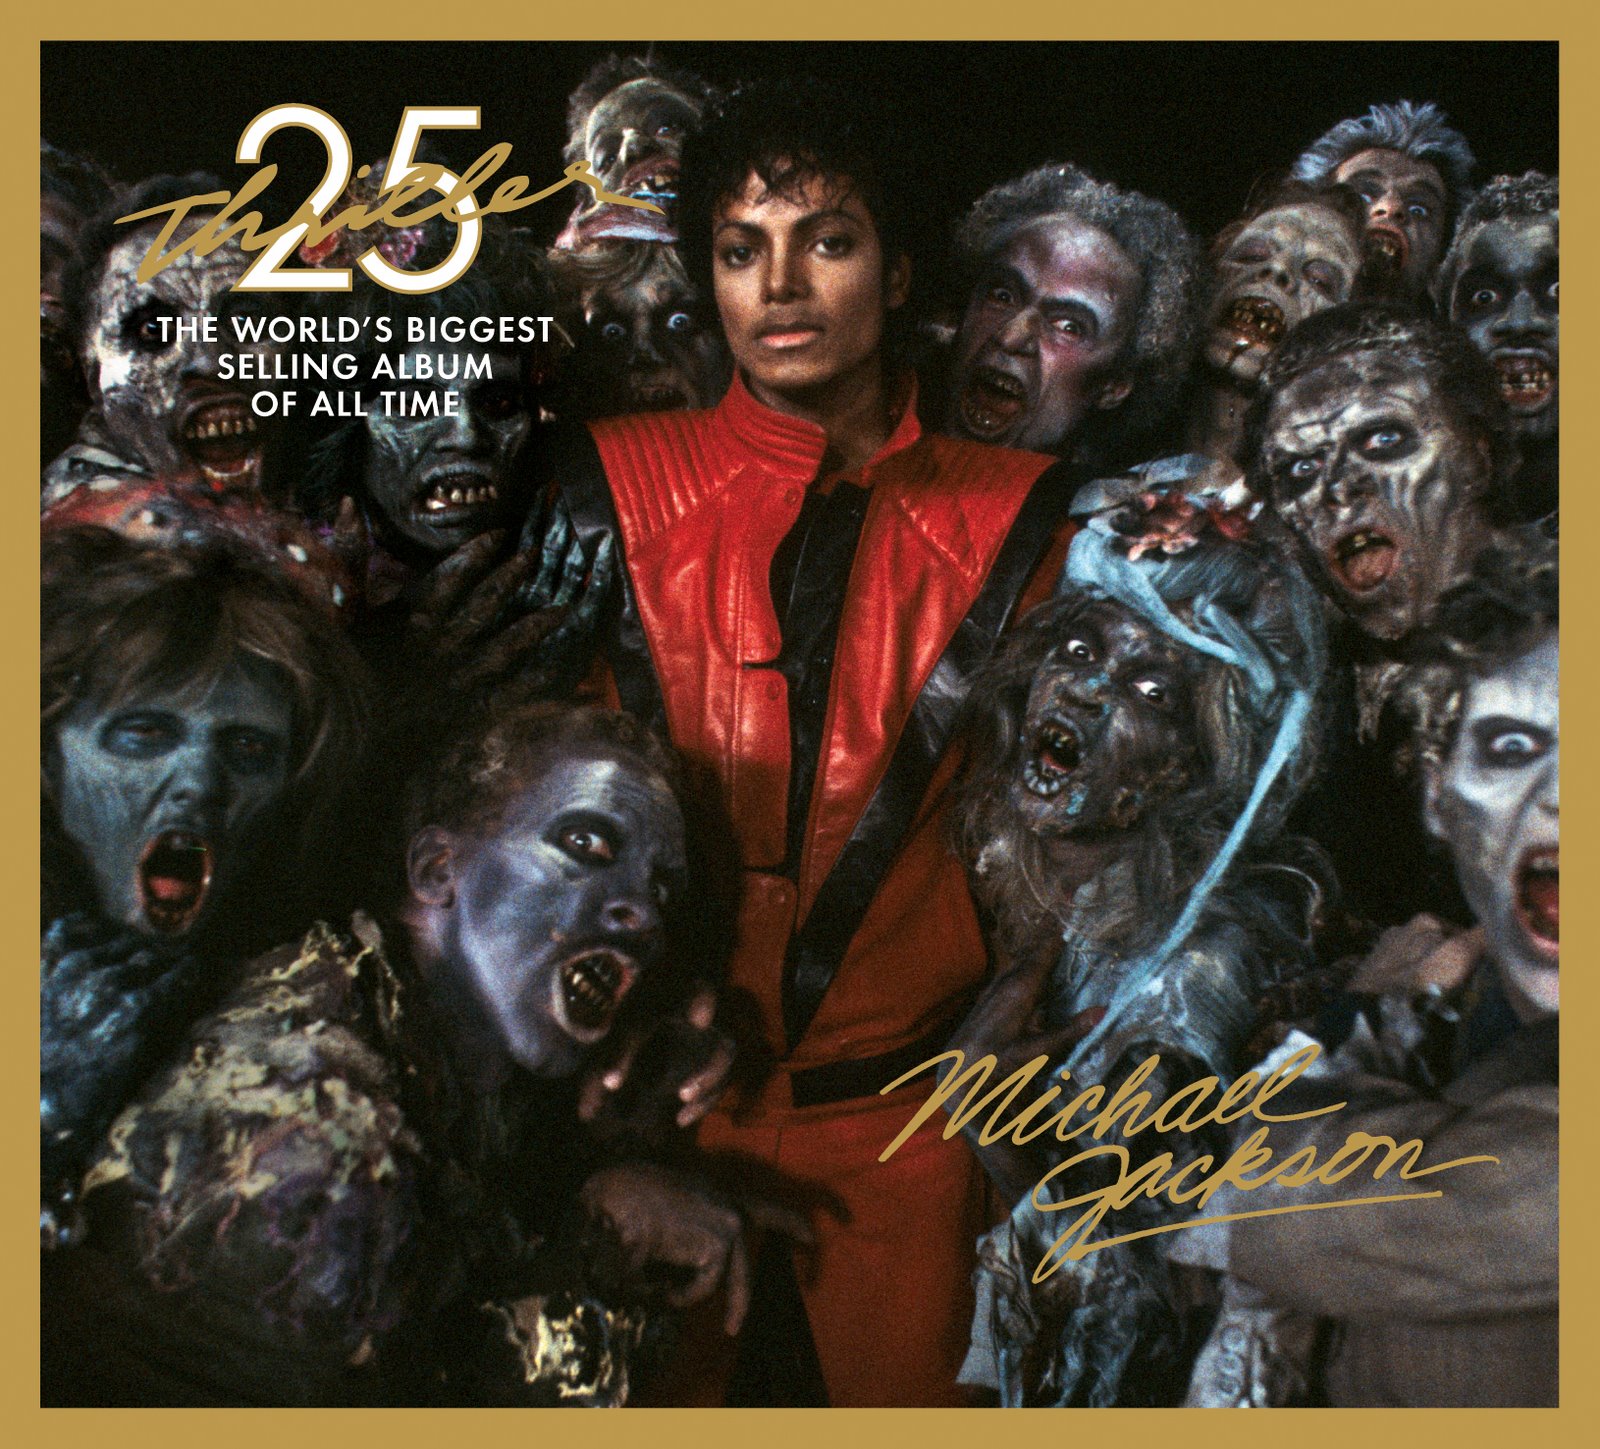 The 25th Anniversary re-issue of Michael Jackson's 1983 hit album 'Thriller.'
